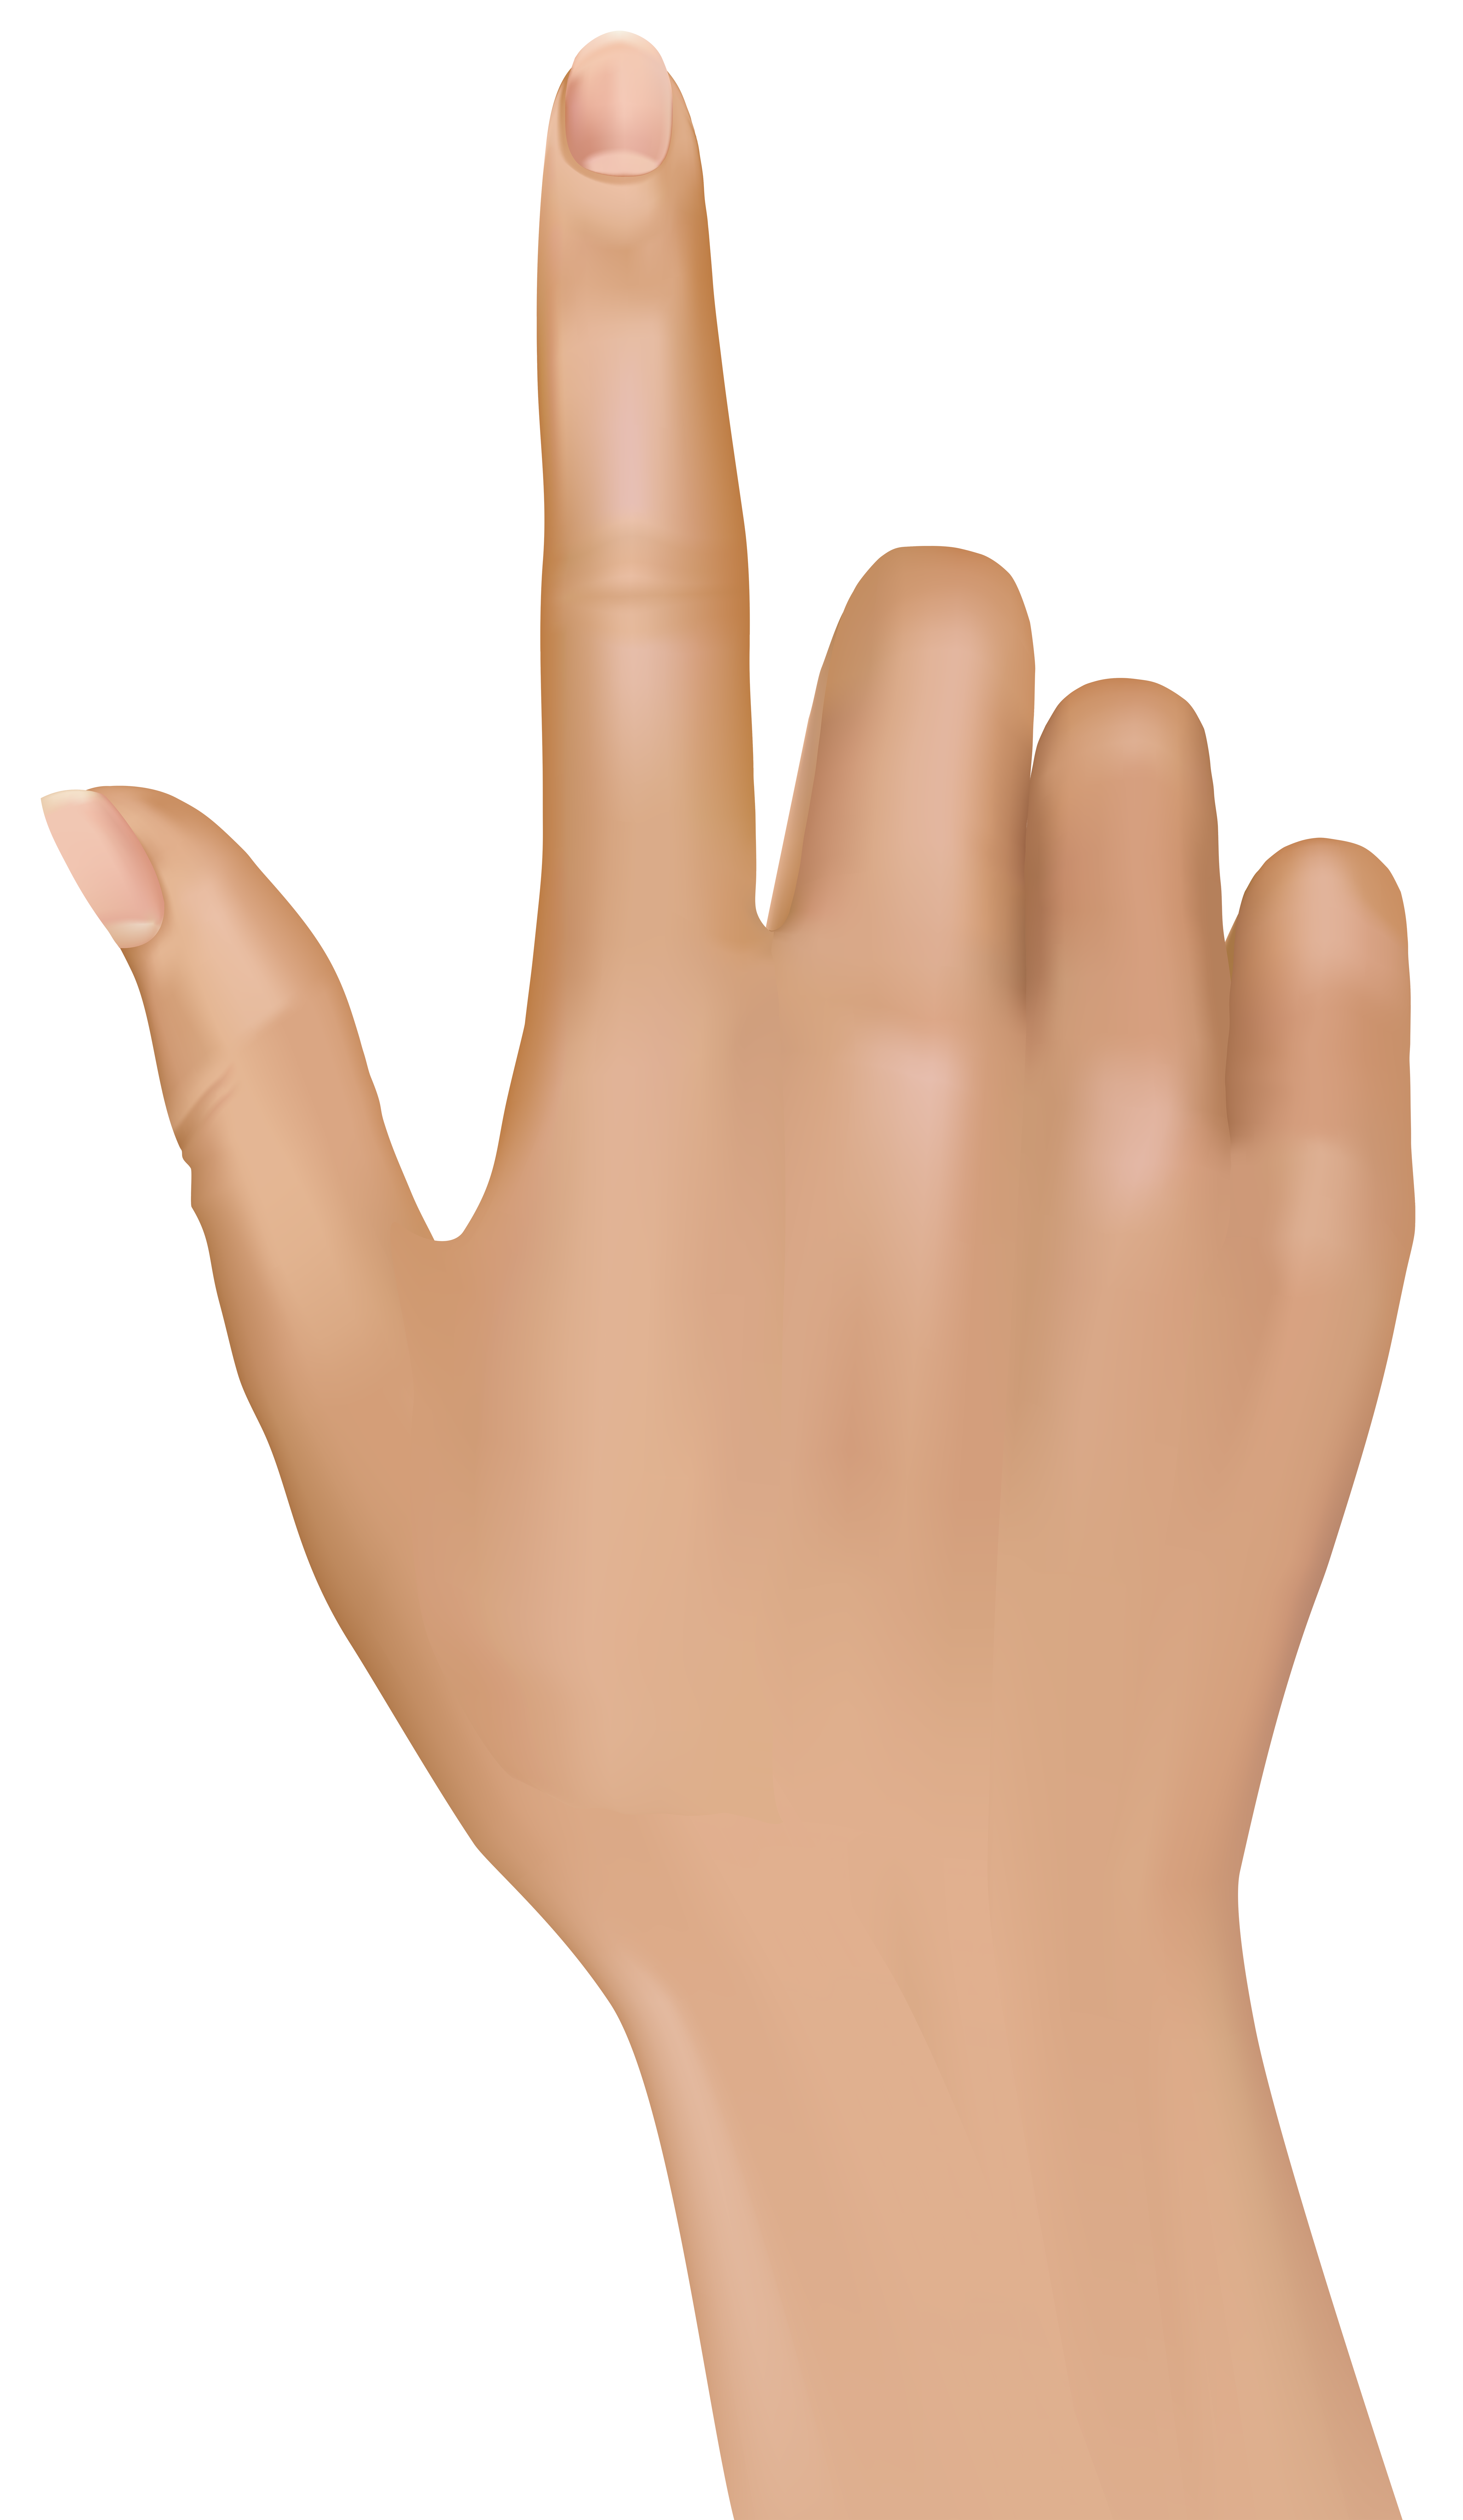 Finger clipart. At getdrawings com free